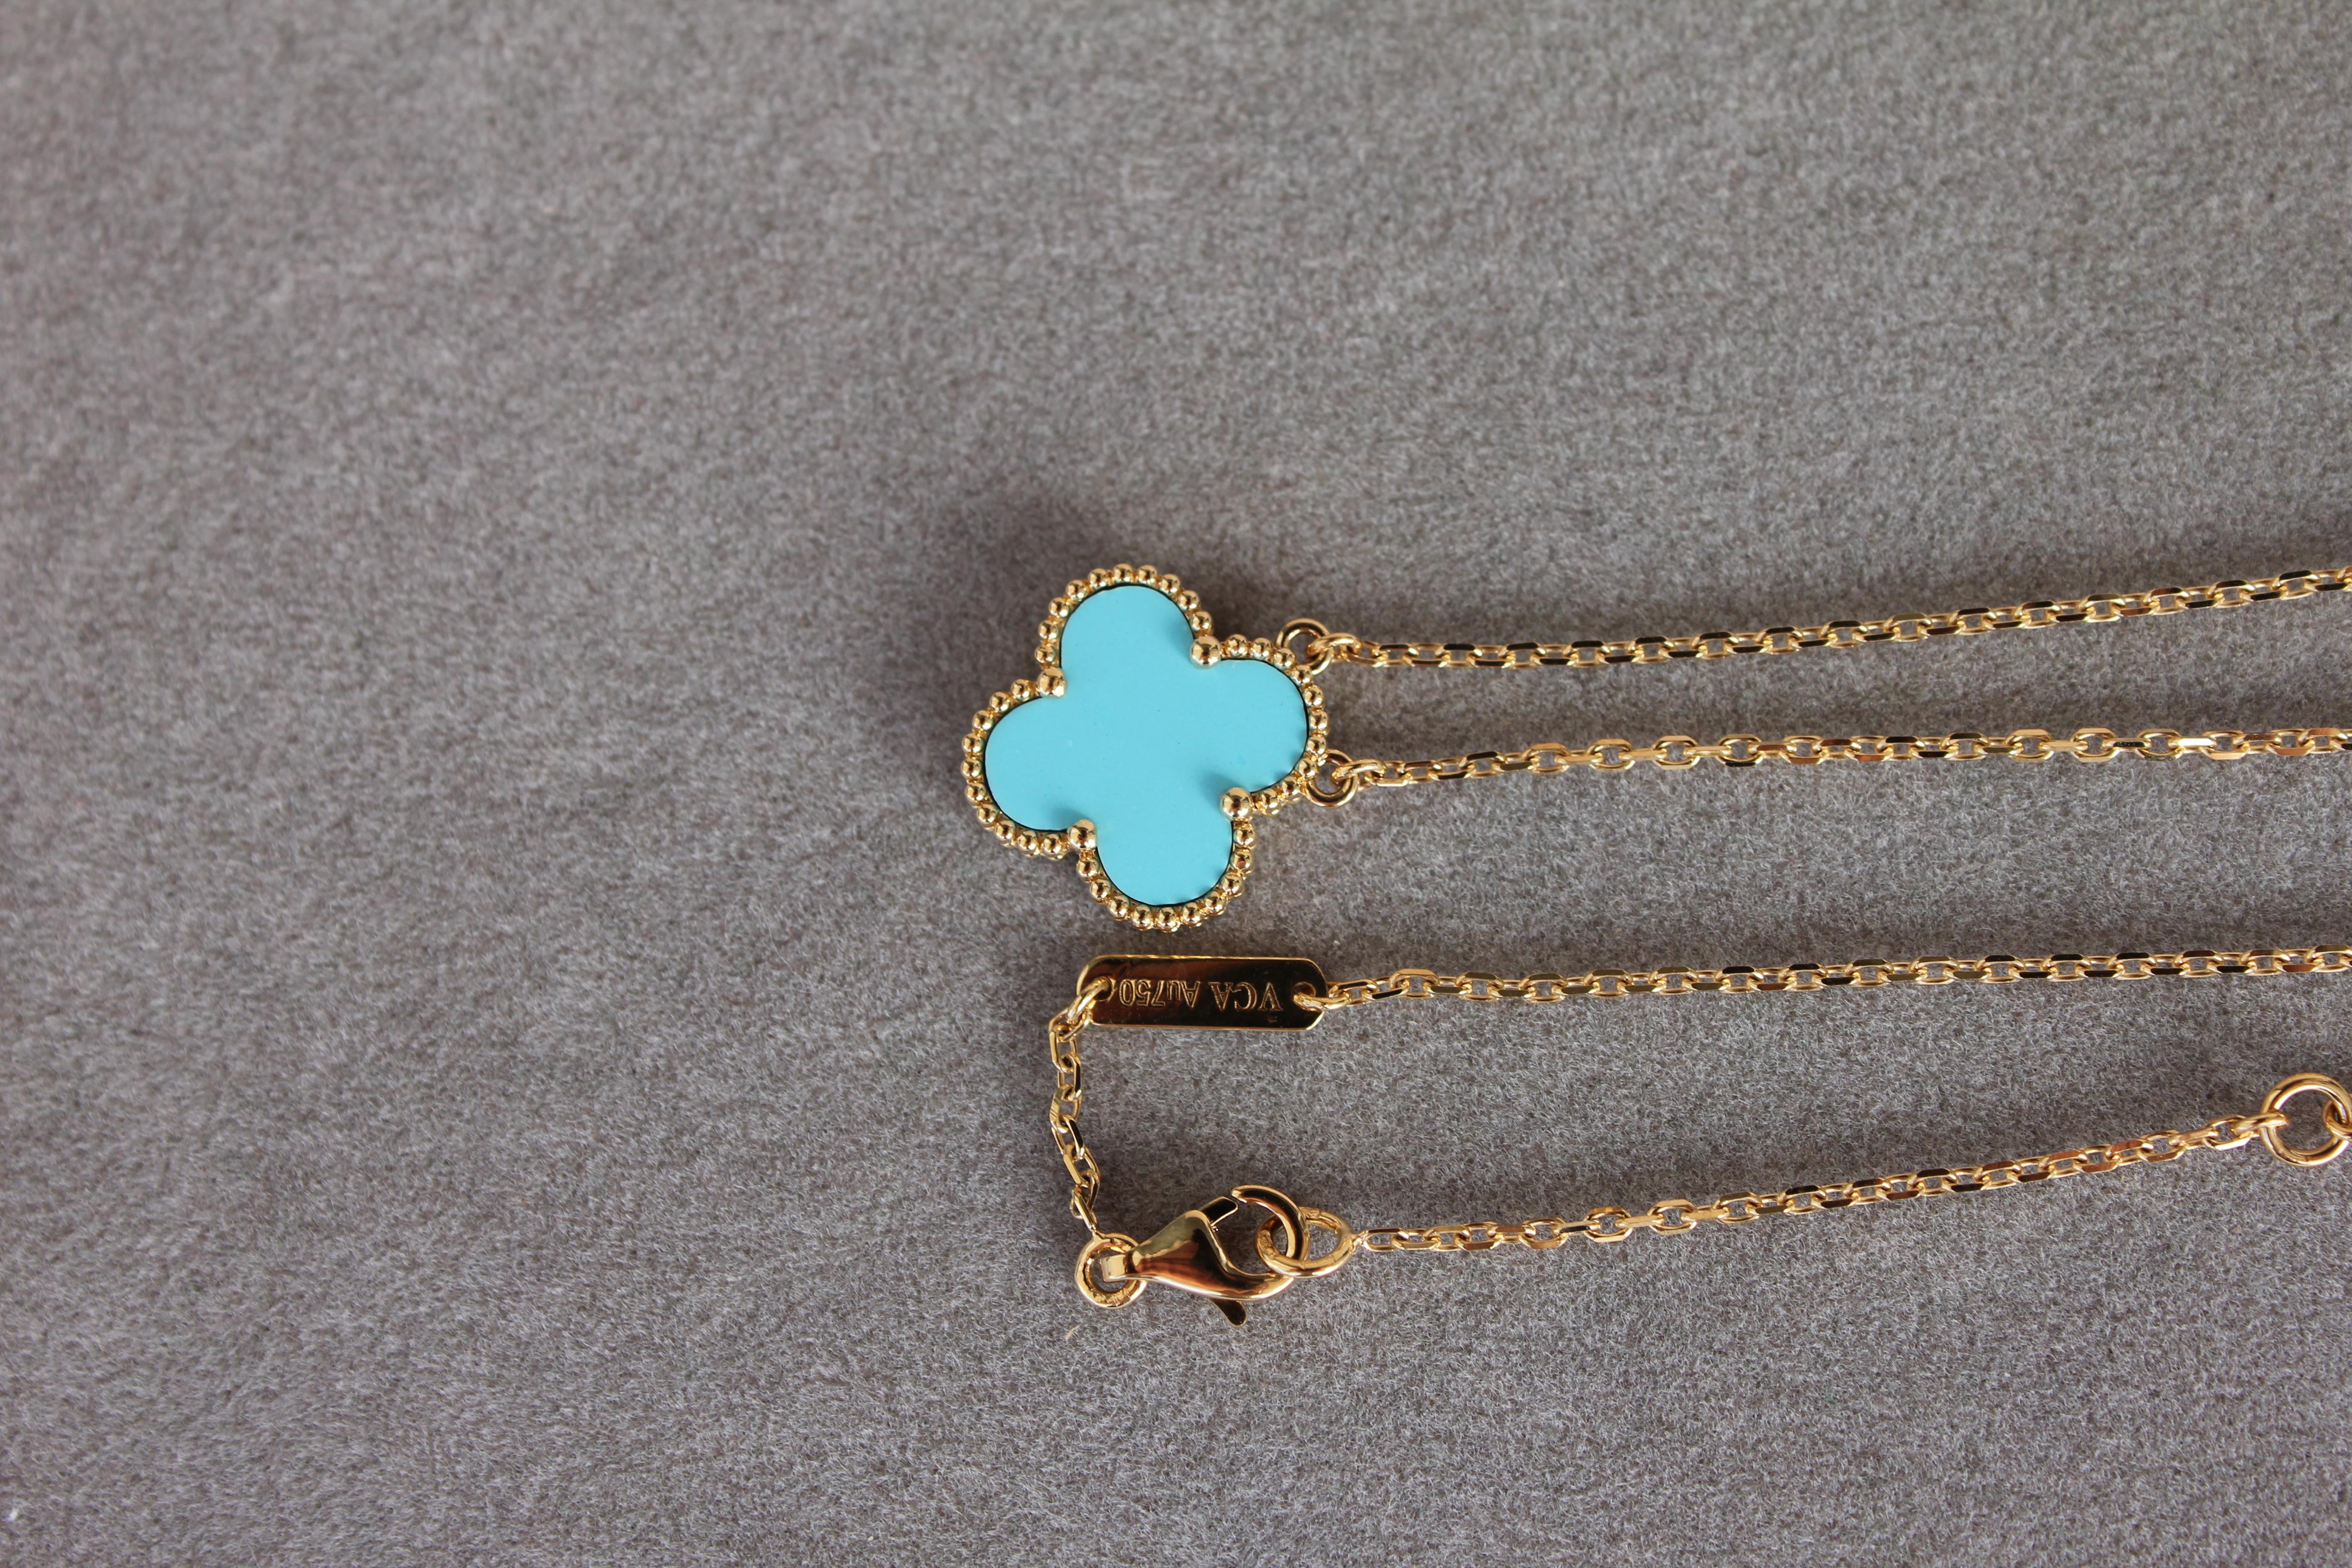 Van Cleef & Arpels Vintage Alhambra Turquoise 18K Yellow Gold Necklace Pendant In Excellent Condition For Sale In Fairfax, VA